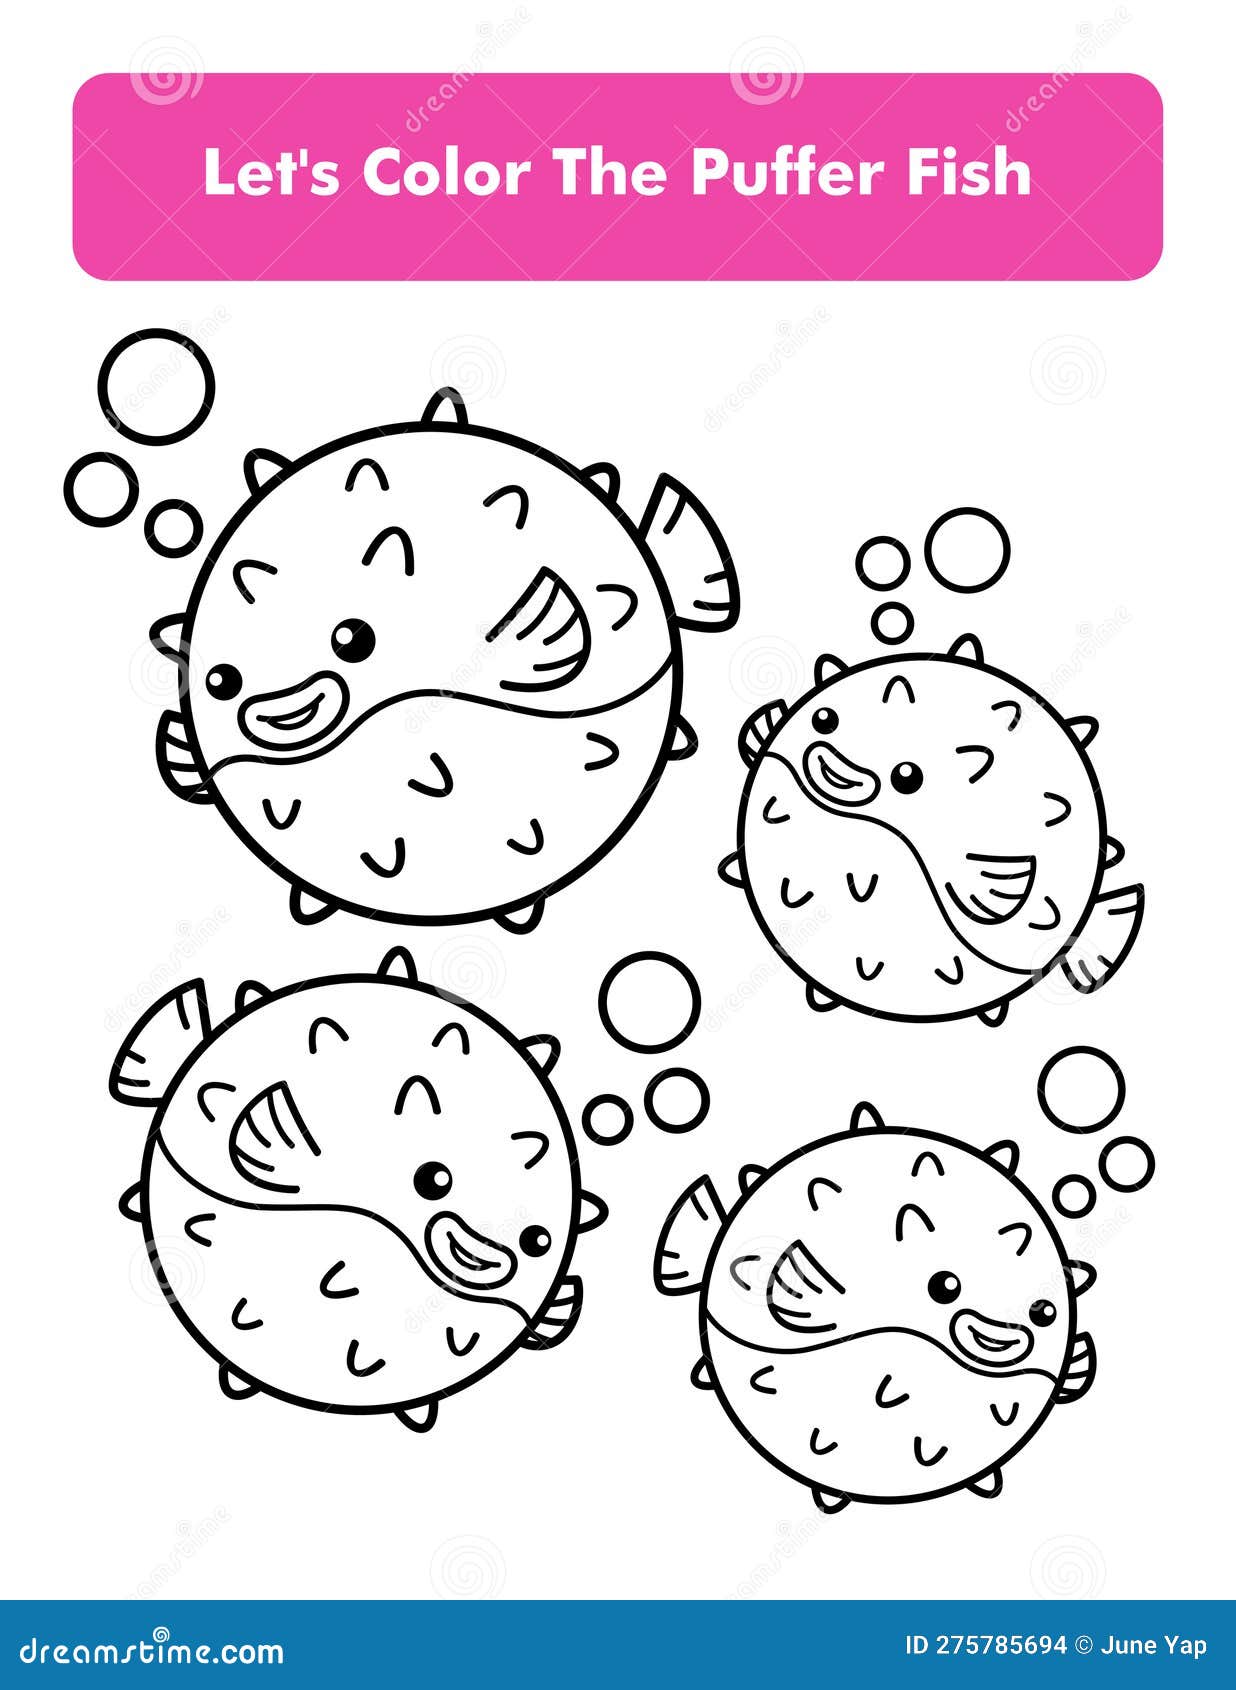 Puffer fish fugu coloring book page in letter page size children coloring worksheet premium vector element stock vector